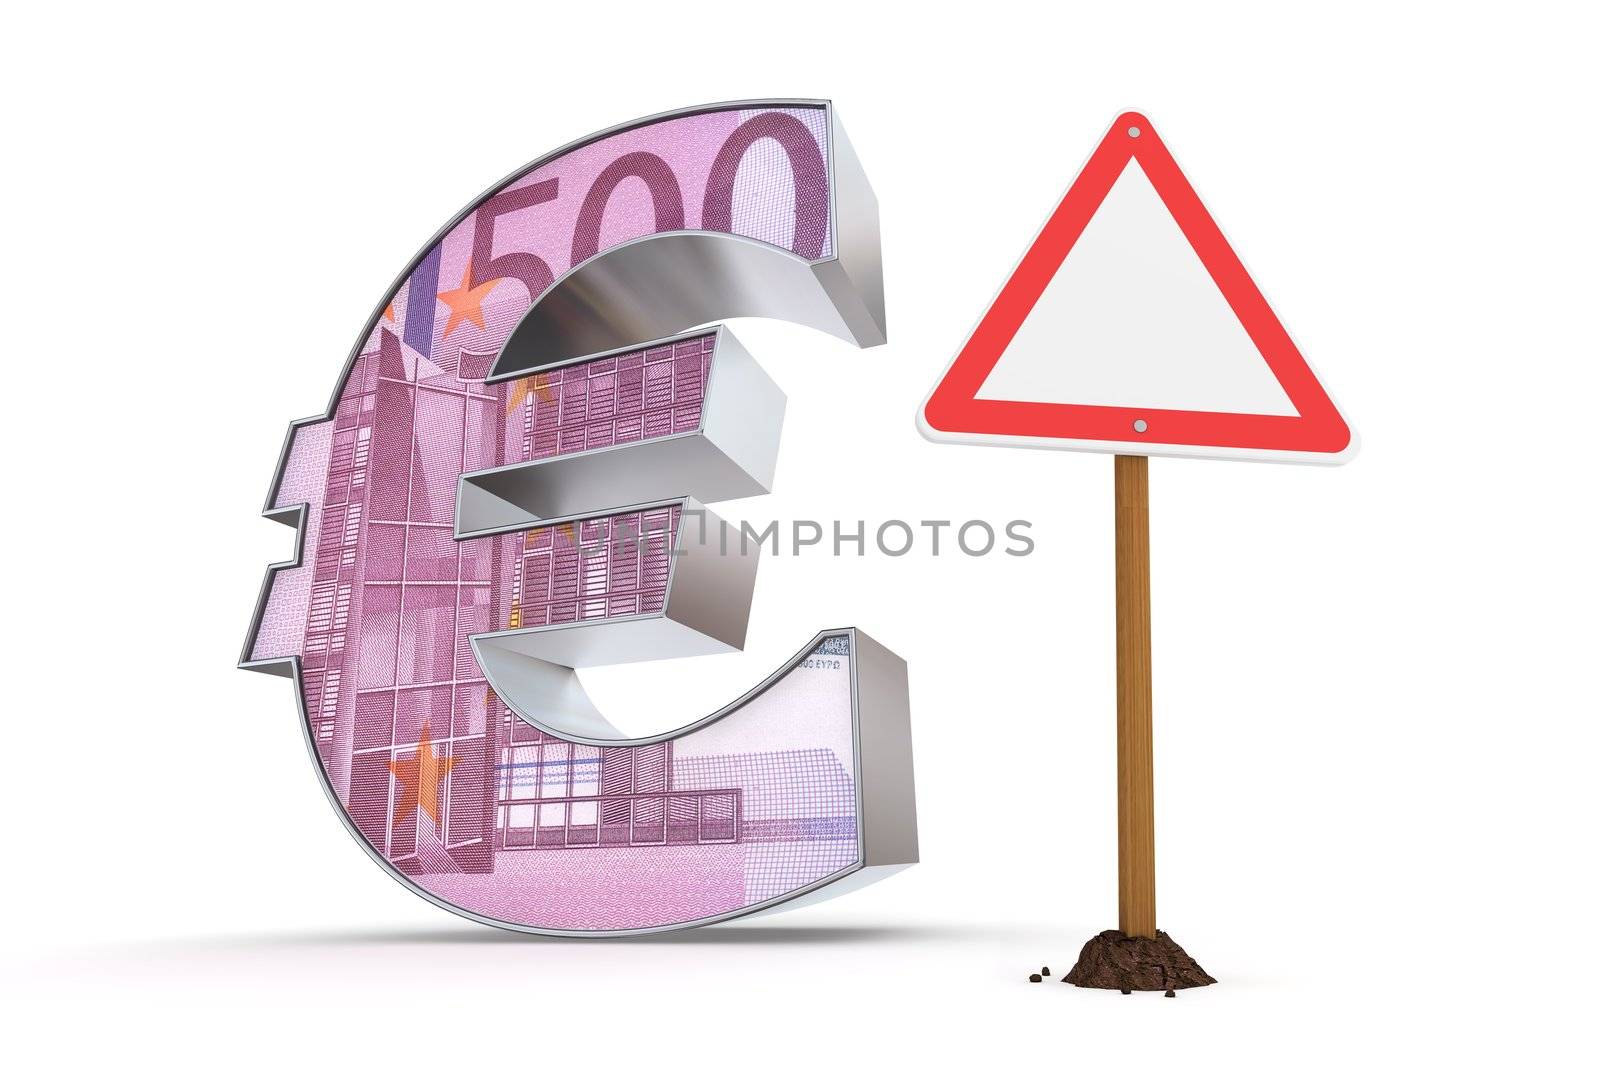 shiny metallic Euro symbol with a 500 Euro banknote texture on it's front - a red and white  triangular warning sign stands next to it